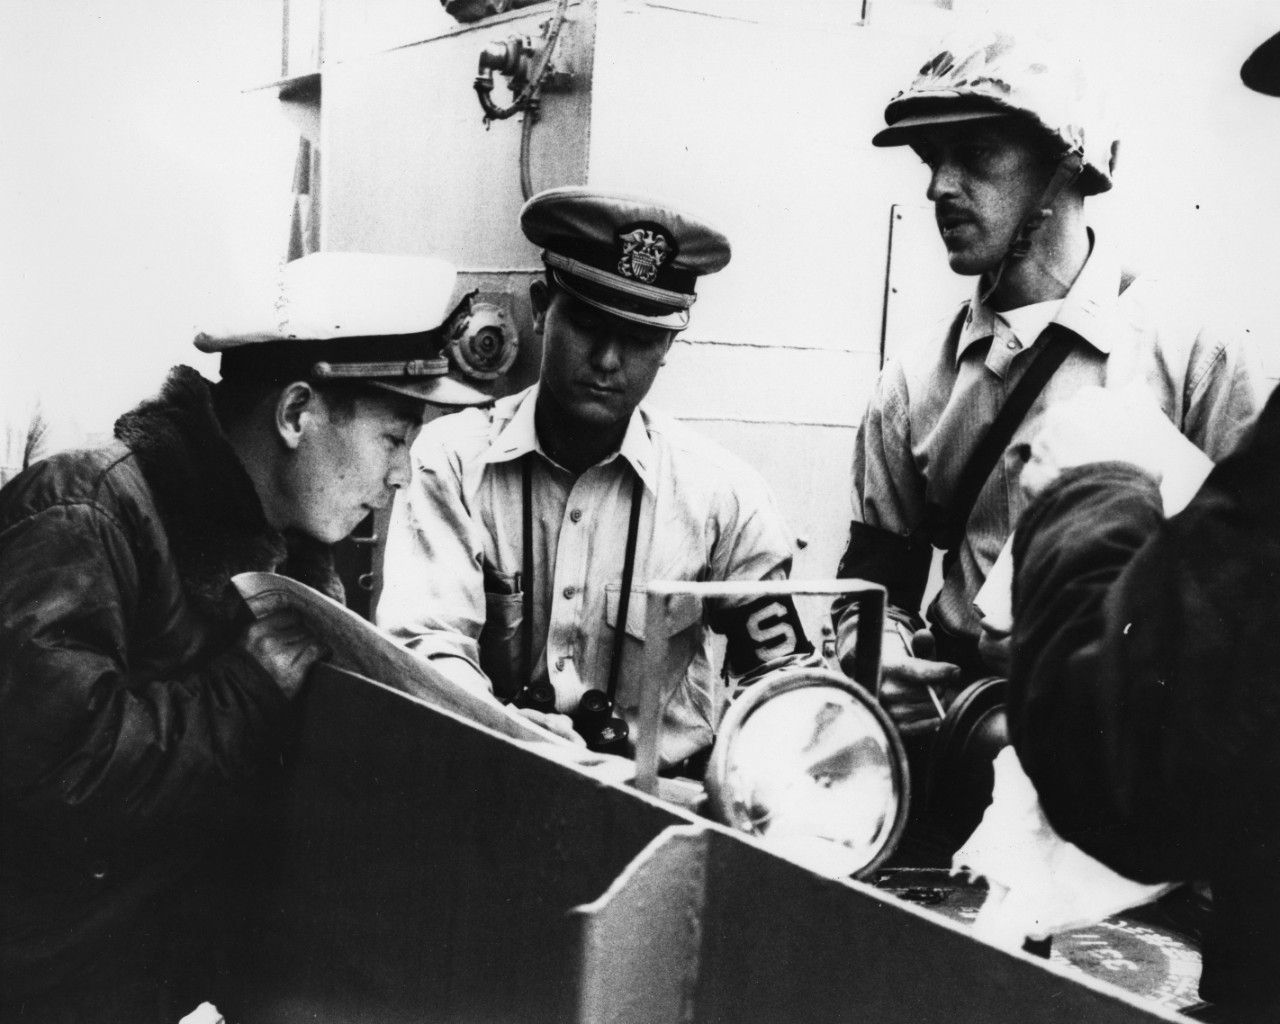 Grade Chujyo Kodo, Japanese Maritime Self Defense Force; Lieutenant Junior Grade Ricard L. Takahashi, USN, attached to the USS Kearsarge (CVS-33); and Captain John Dornan, USMC, Commanding Officer of the Marine Detachment on board the Kearsarge. This LCM is being used to transport water, bread, and medicine to areas flooded by Typhoon Vera.